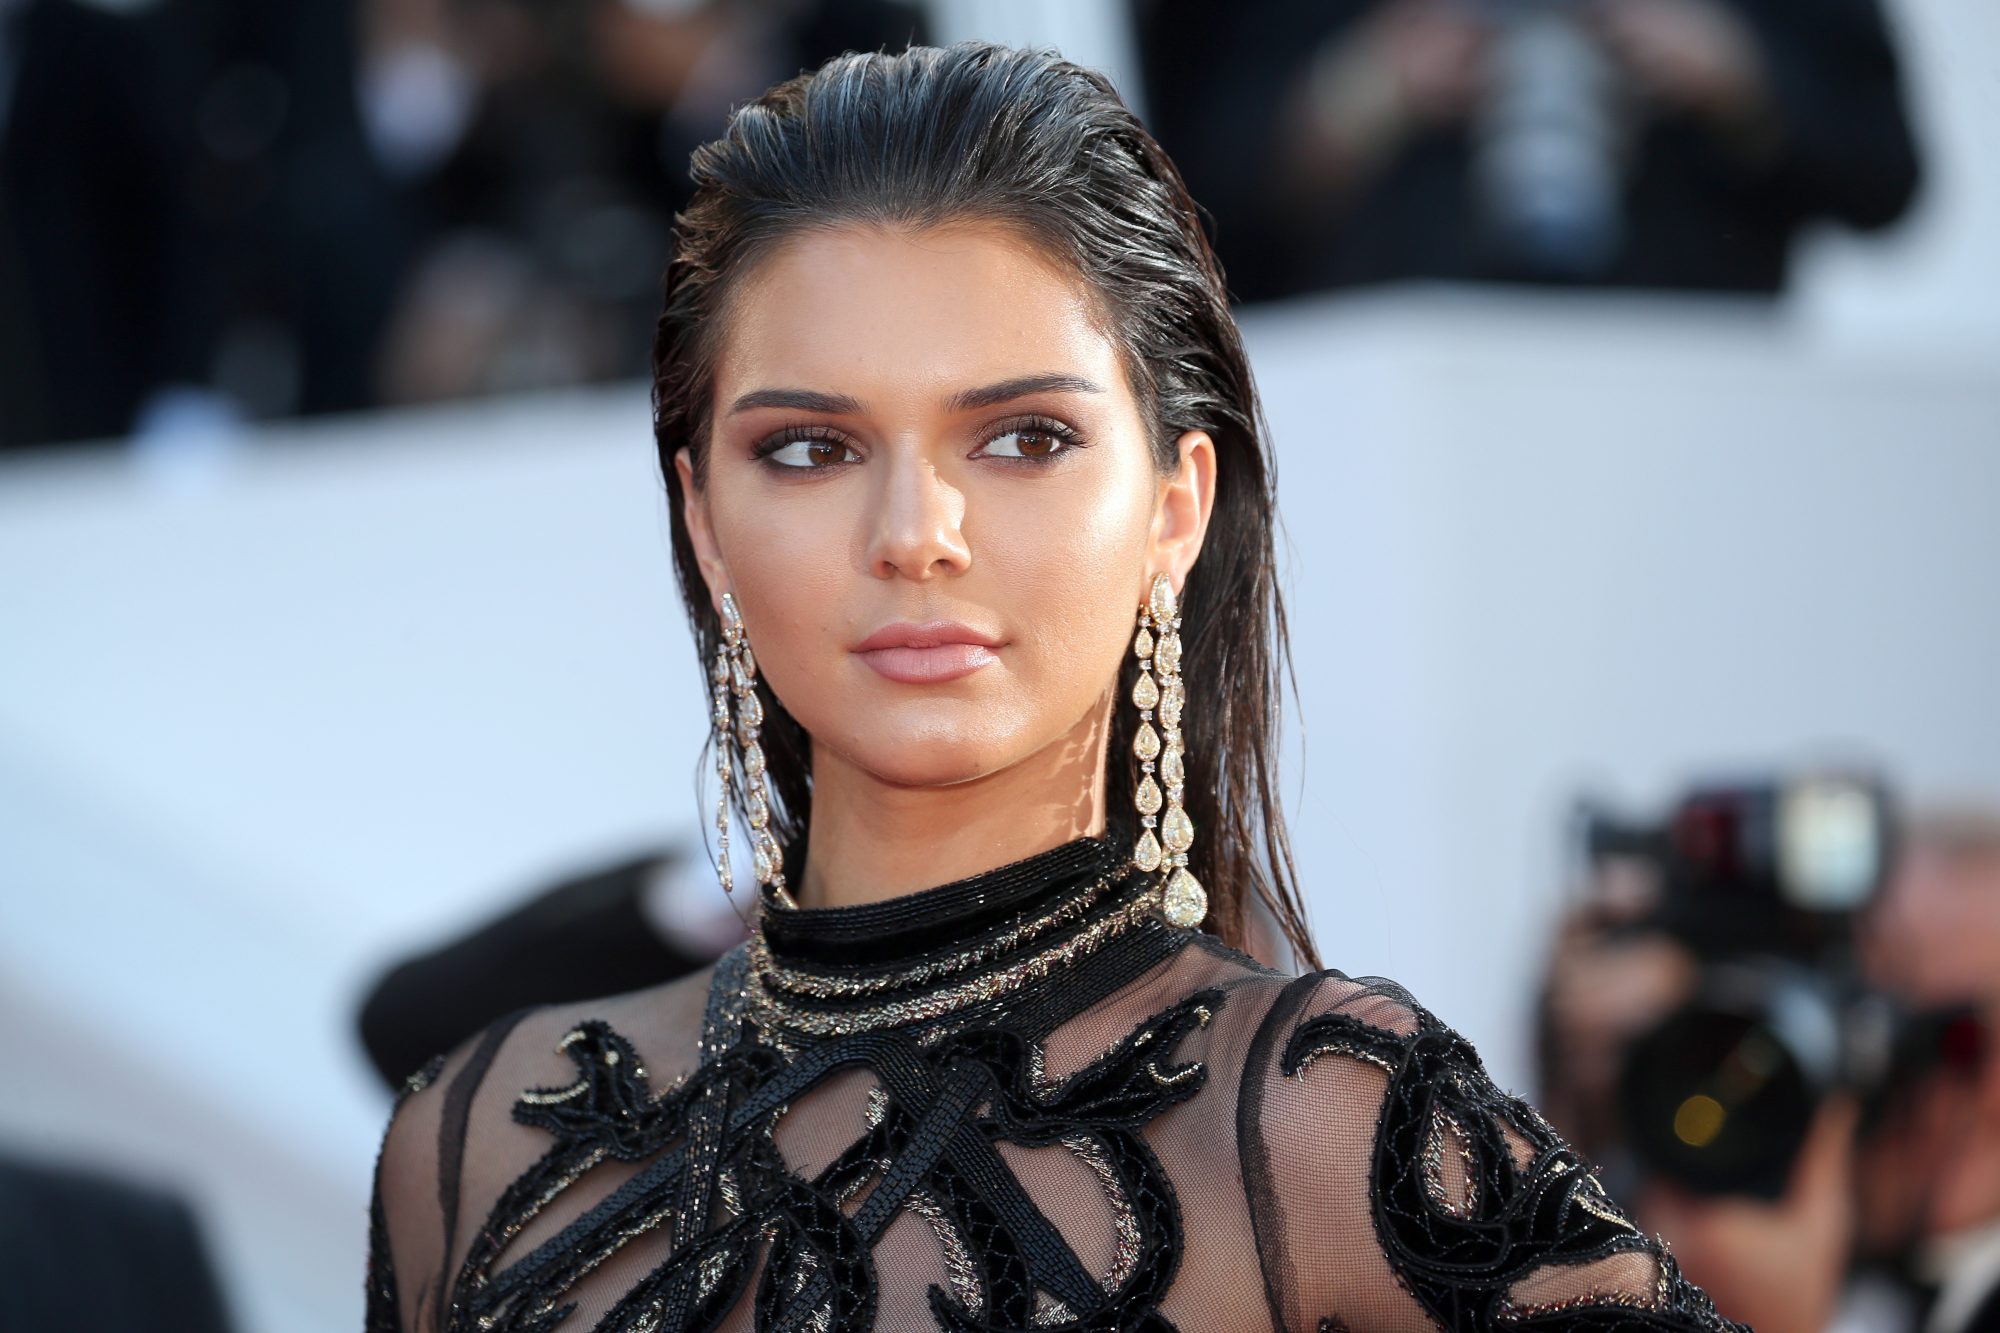 You probably haven't noticed that Kendall Jenner wears this type of ...